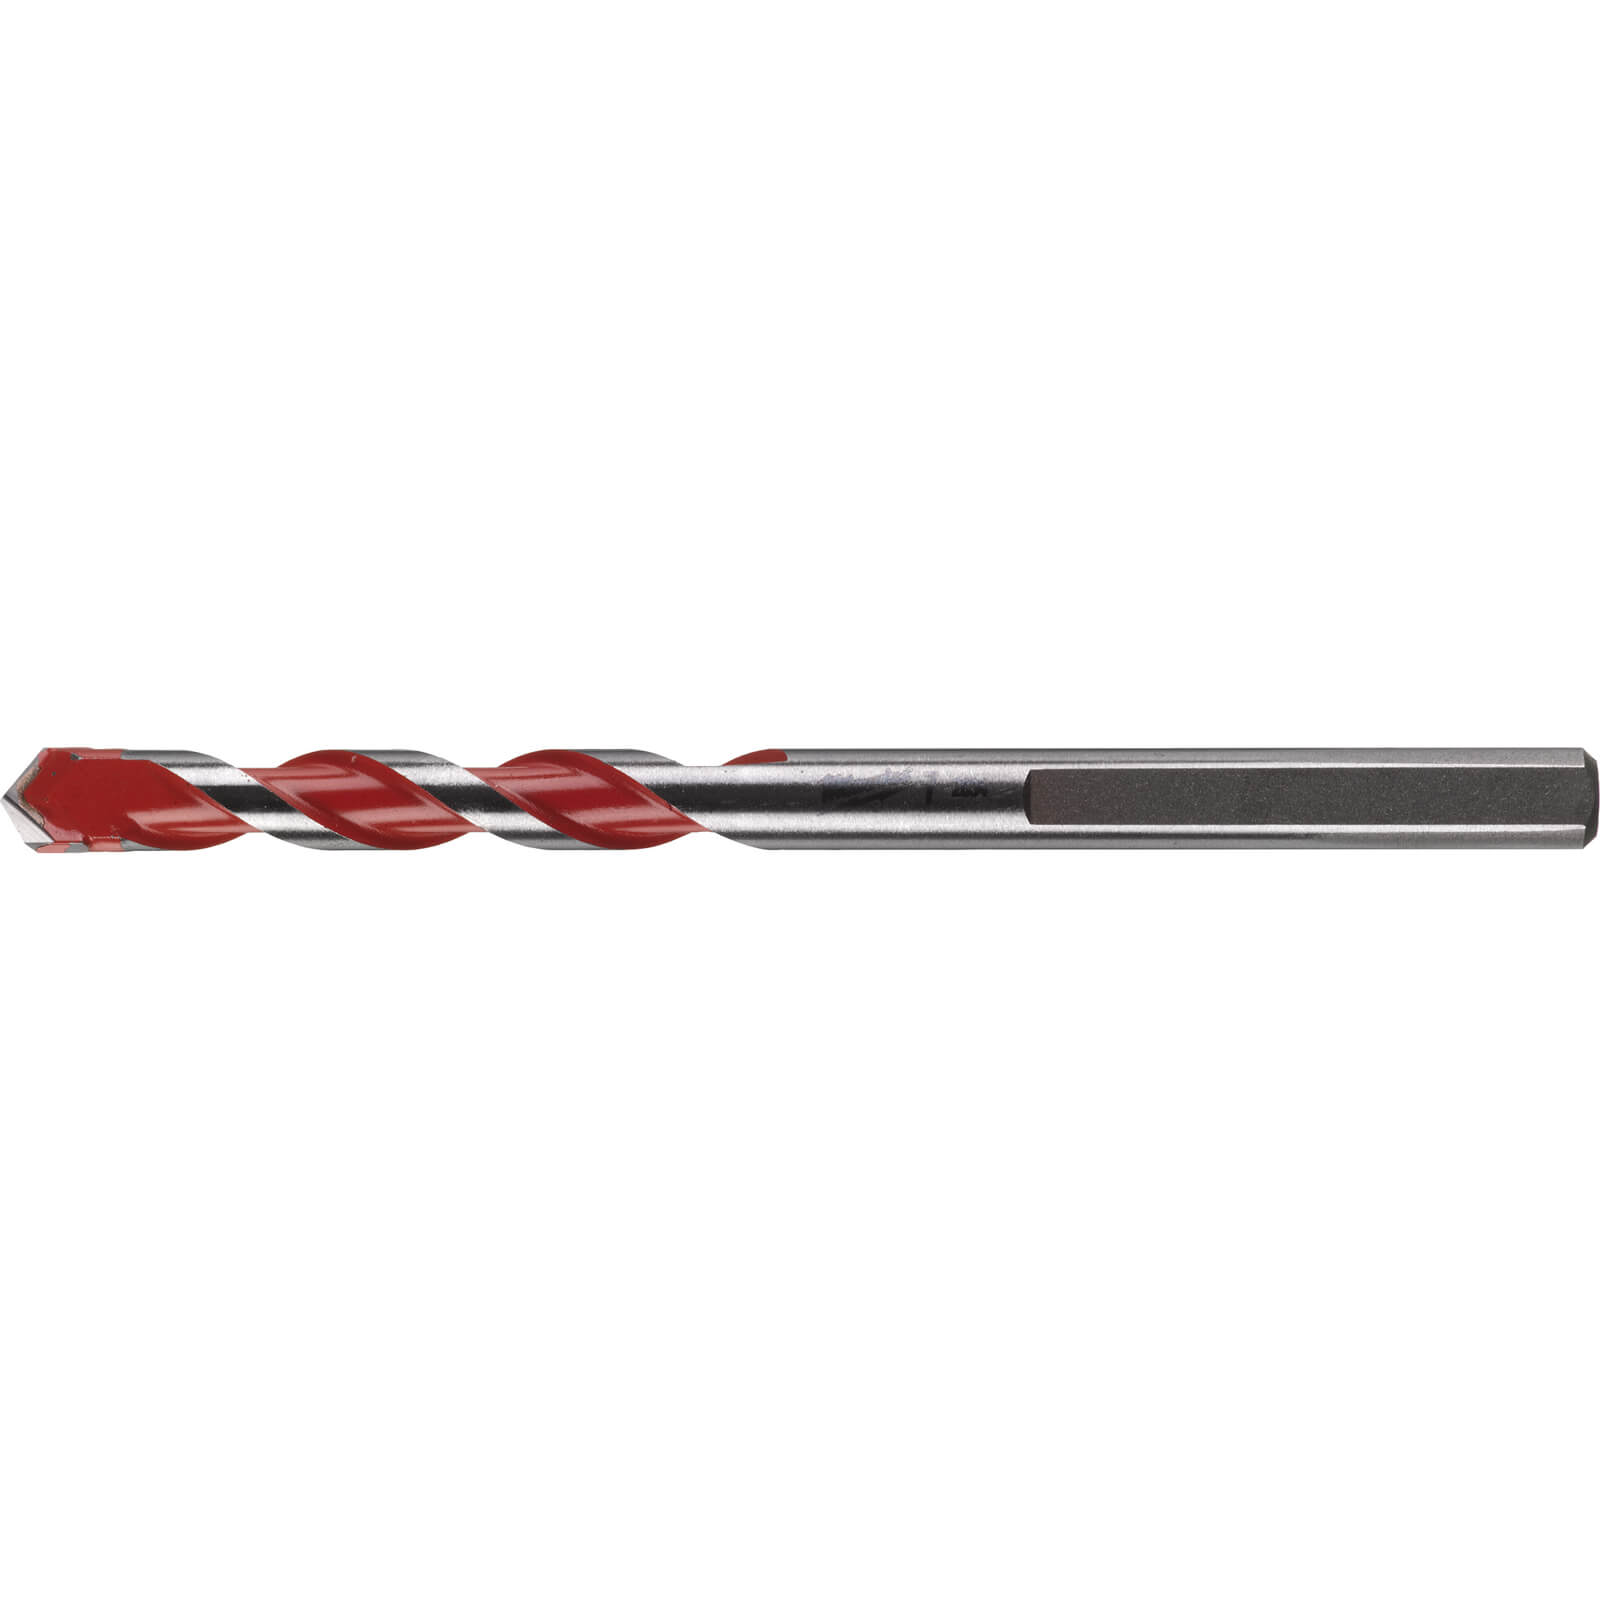 Image of Milwaukee Premium Concrete Drill 7mm 100mm Pack of 1